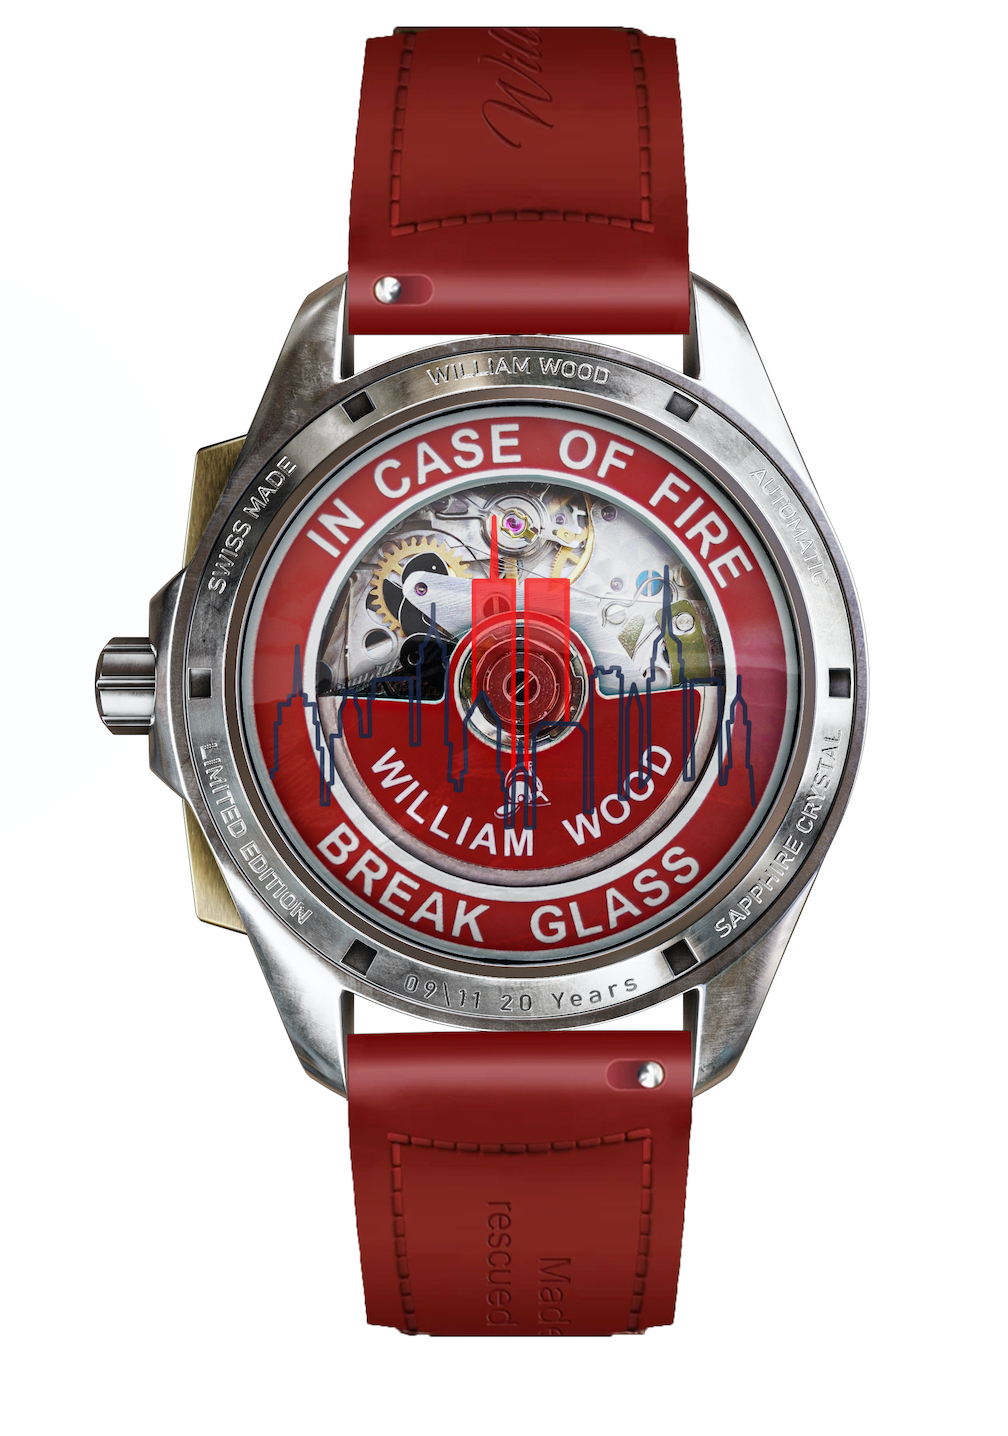 William Wood Time for Heroes watch